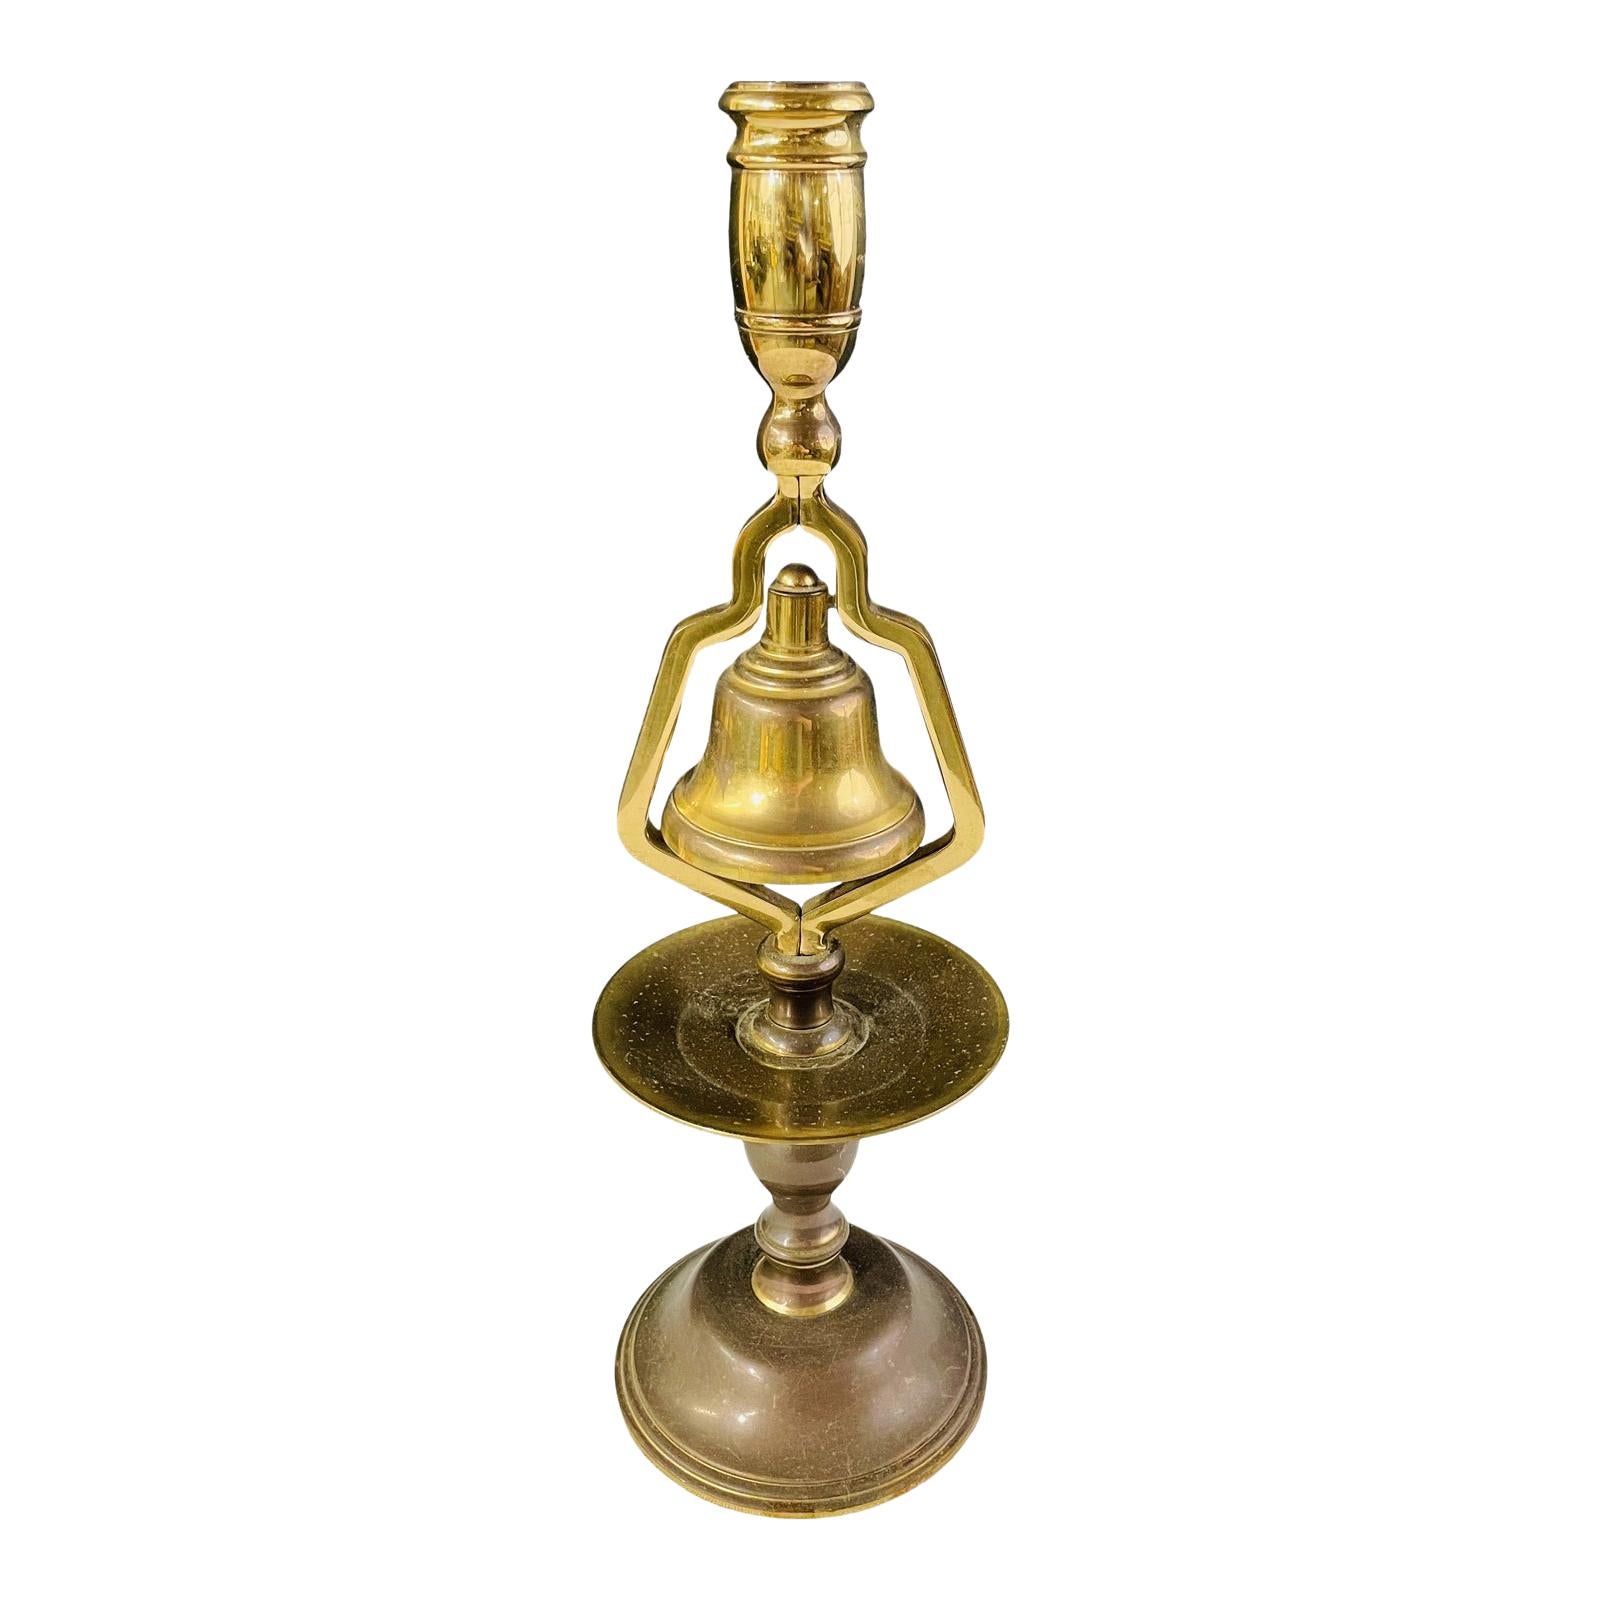 Antique English Victorian Brass Tavern Candlestick with Service Bell